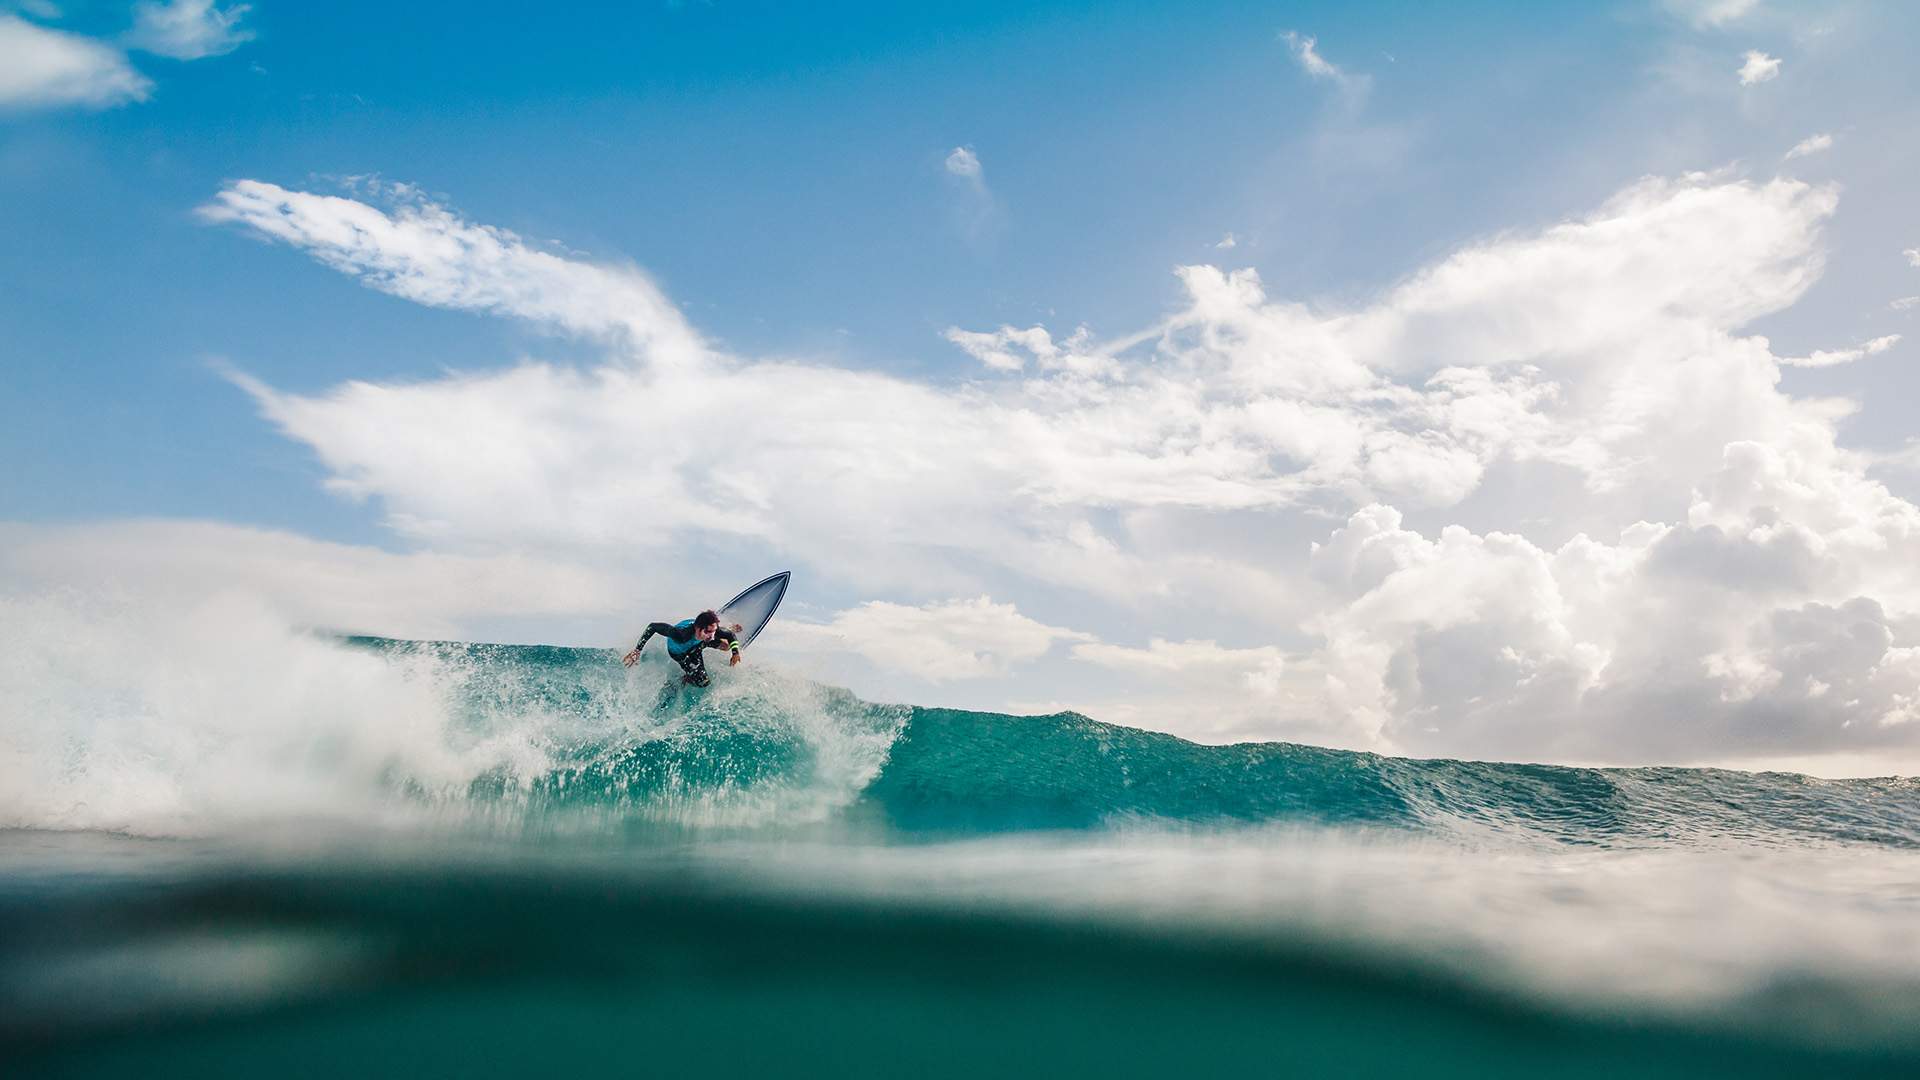 A Massive New Surf Park Is Set to Make Waves in Regional Australia